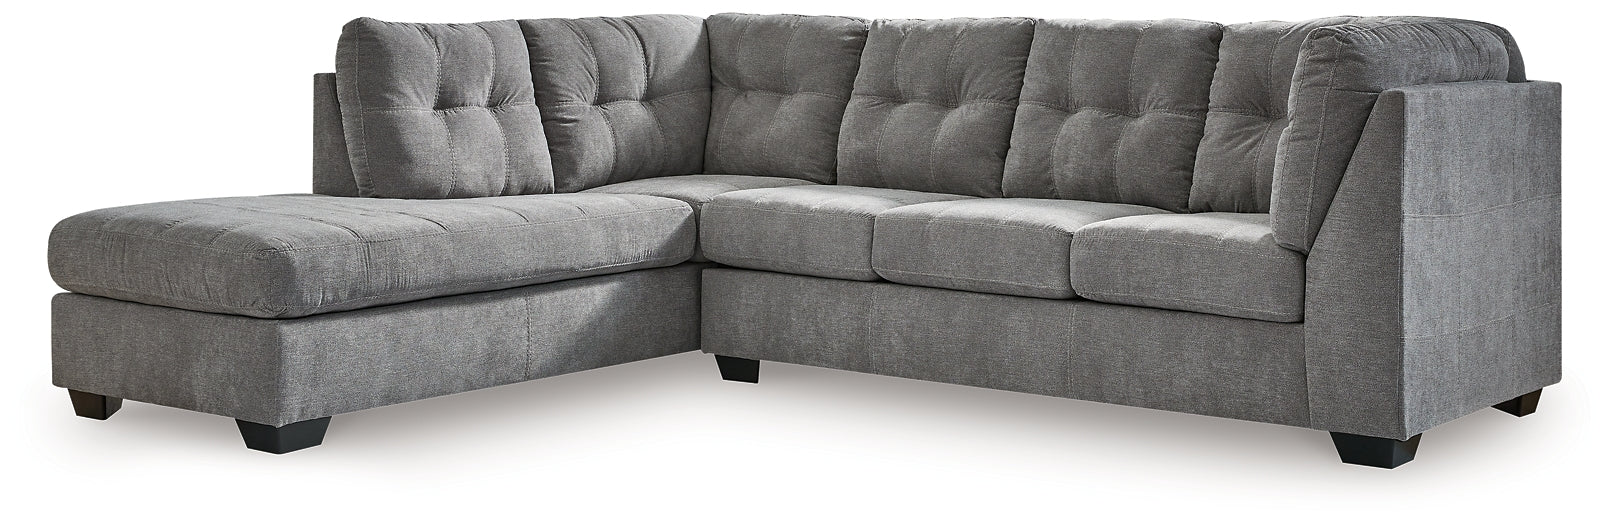 Marleton 2-Piece Sleeper Sectional with Chaise JB's Furniture  Home Furniture, Home Decor, Furniture Store